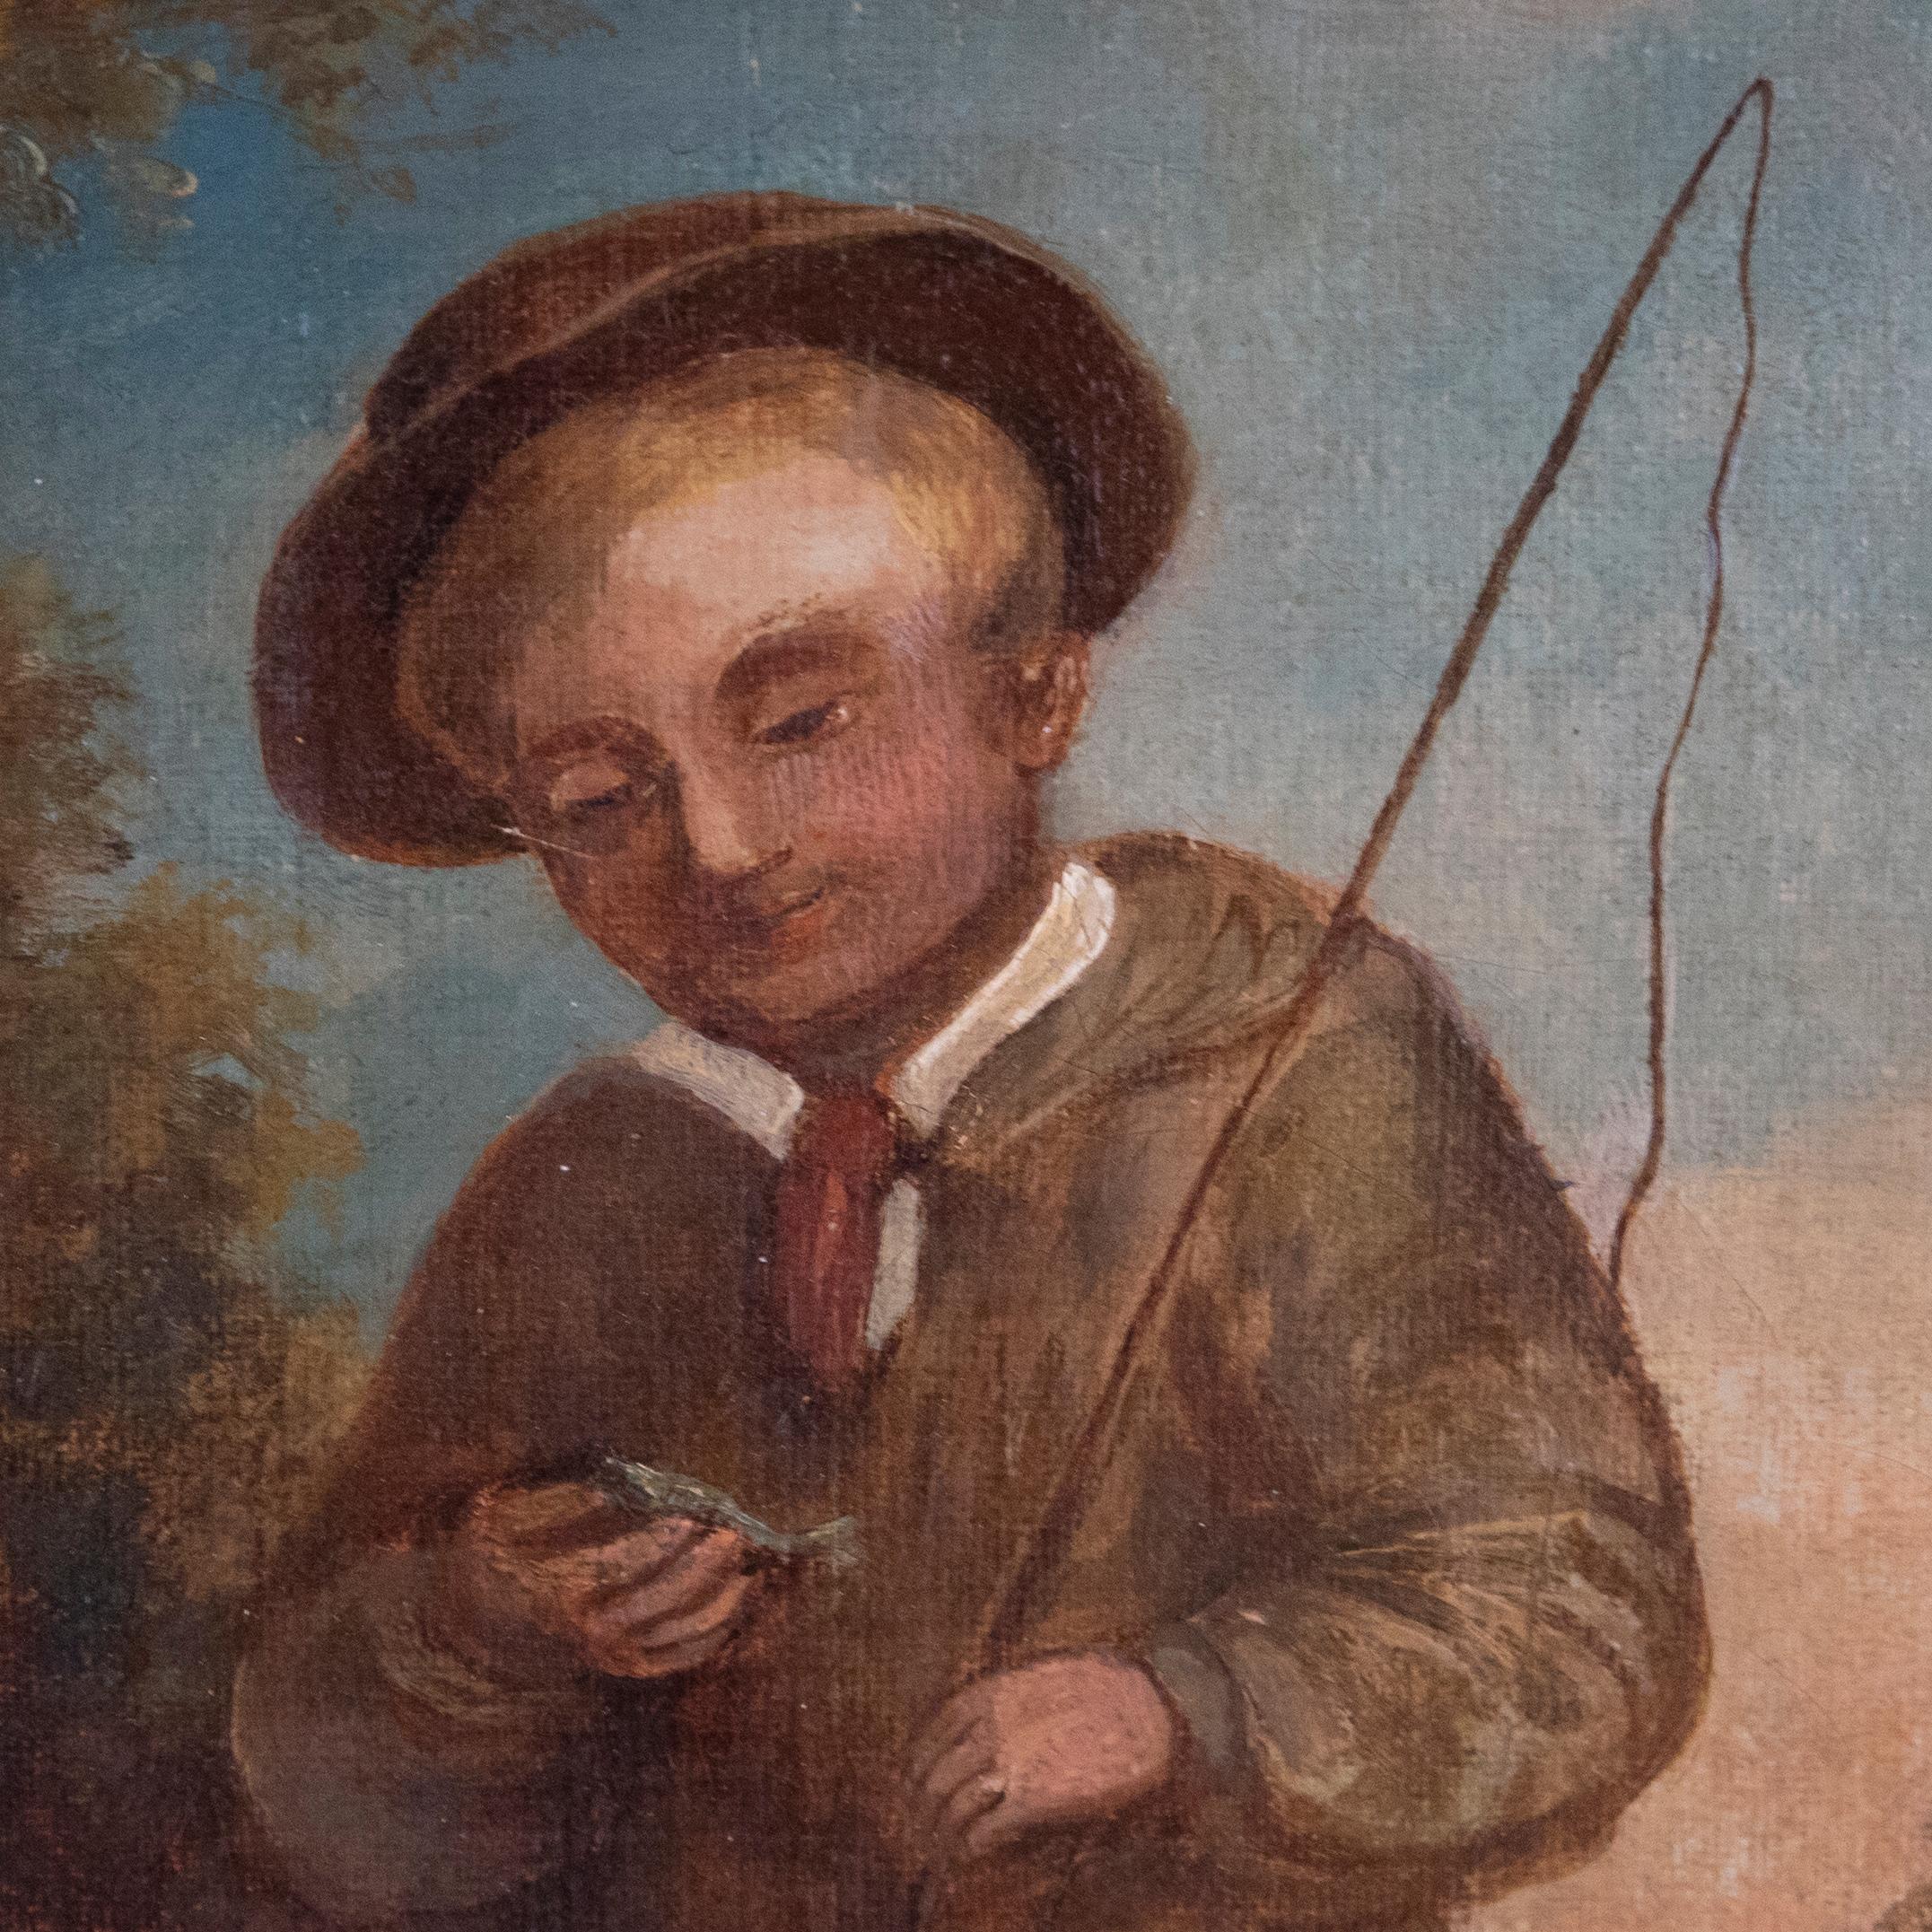 This charming piece depicts a young boy holding a fish that he has caught in the stream. The artist perfectly capture the proud expression on the boy's face as he looks down at his catch. The scene is painted in a naive, folk style capturing the